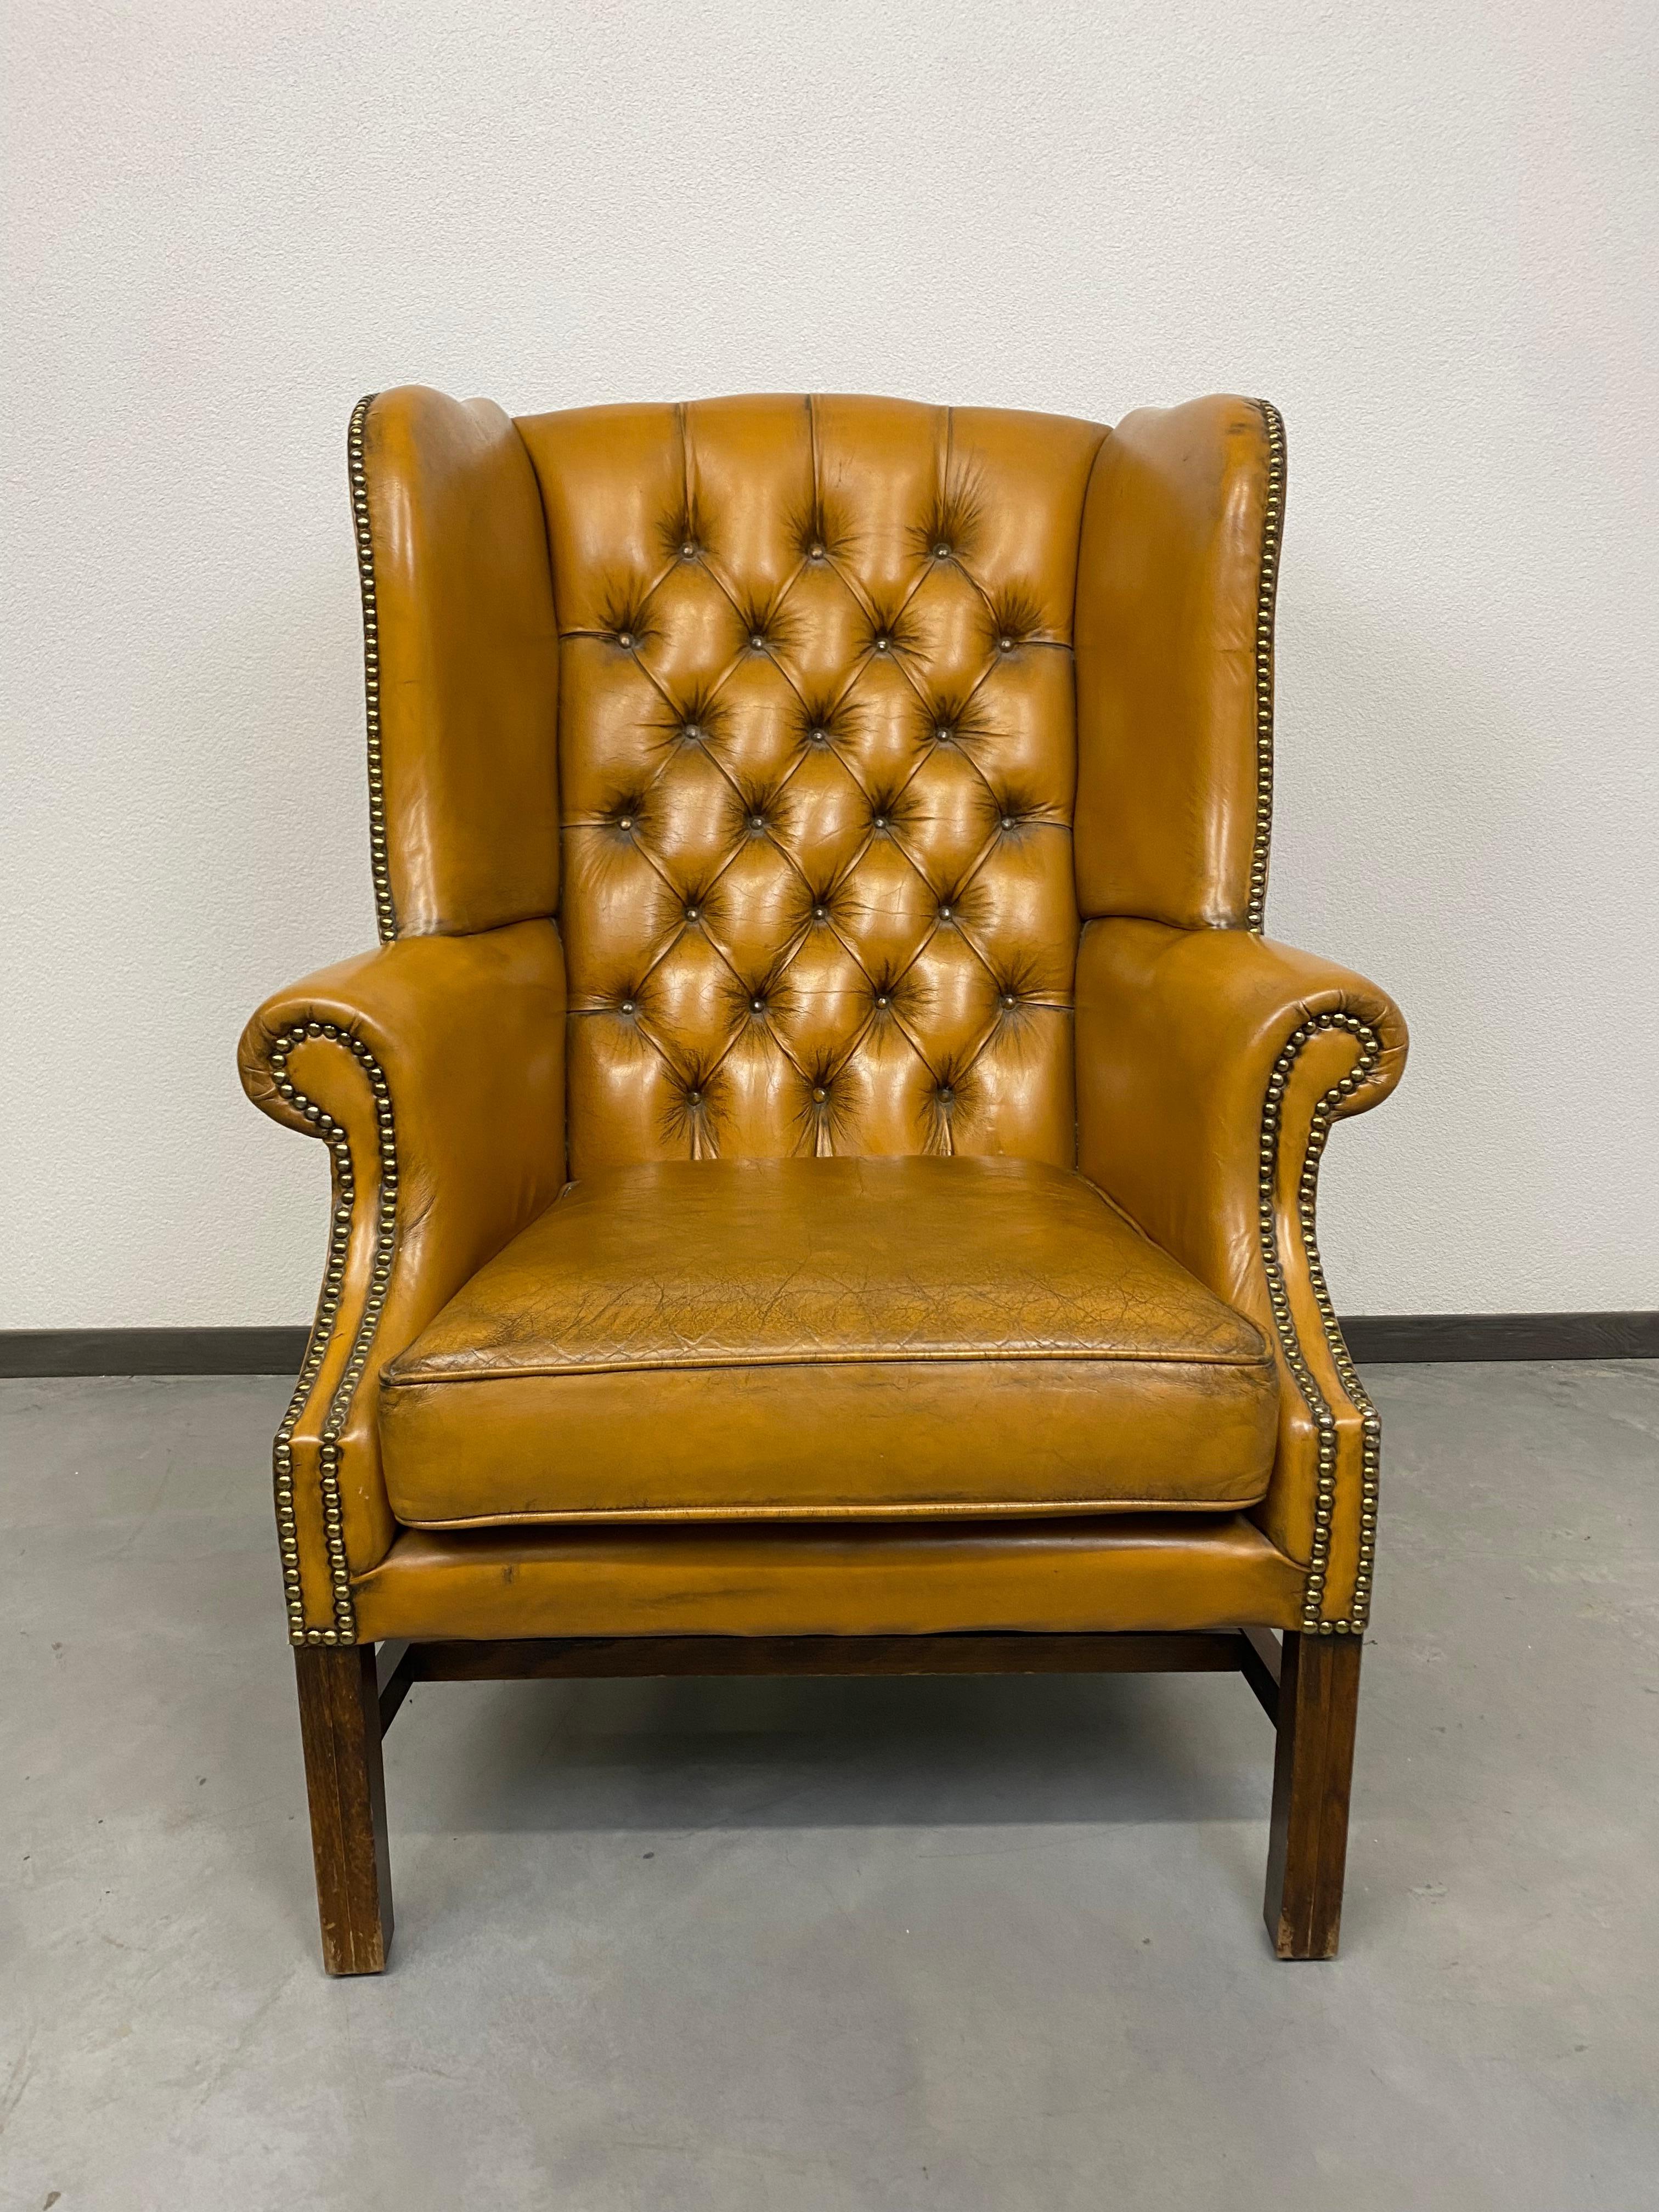 Cigar brown leather Victorian Chesterfield wingback armchair in original vintage condition.